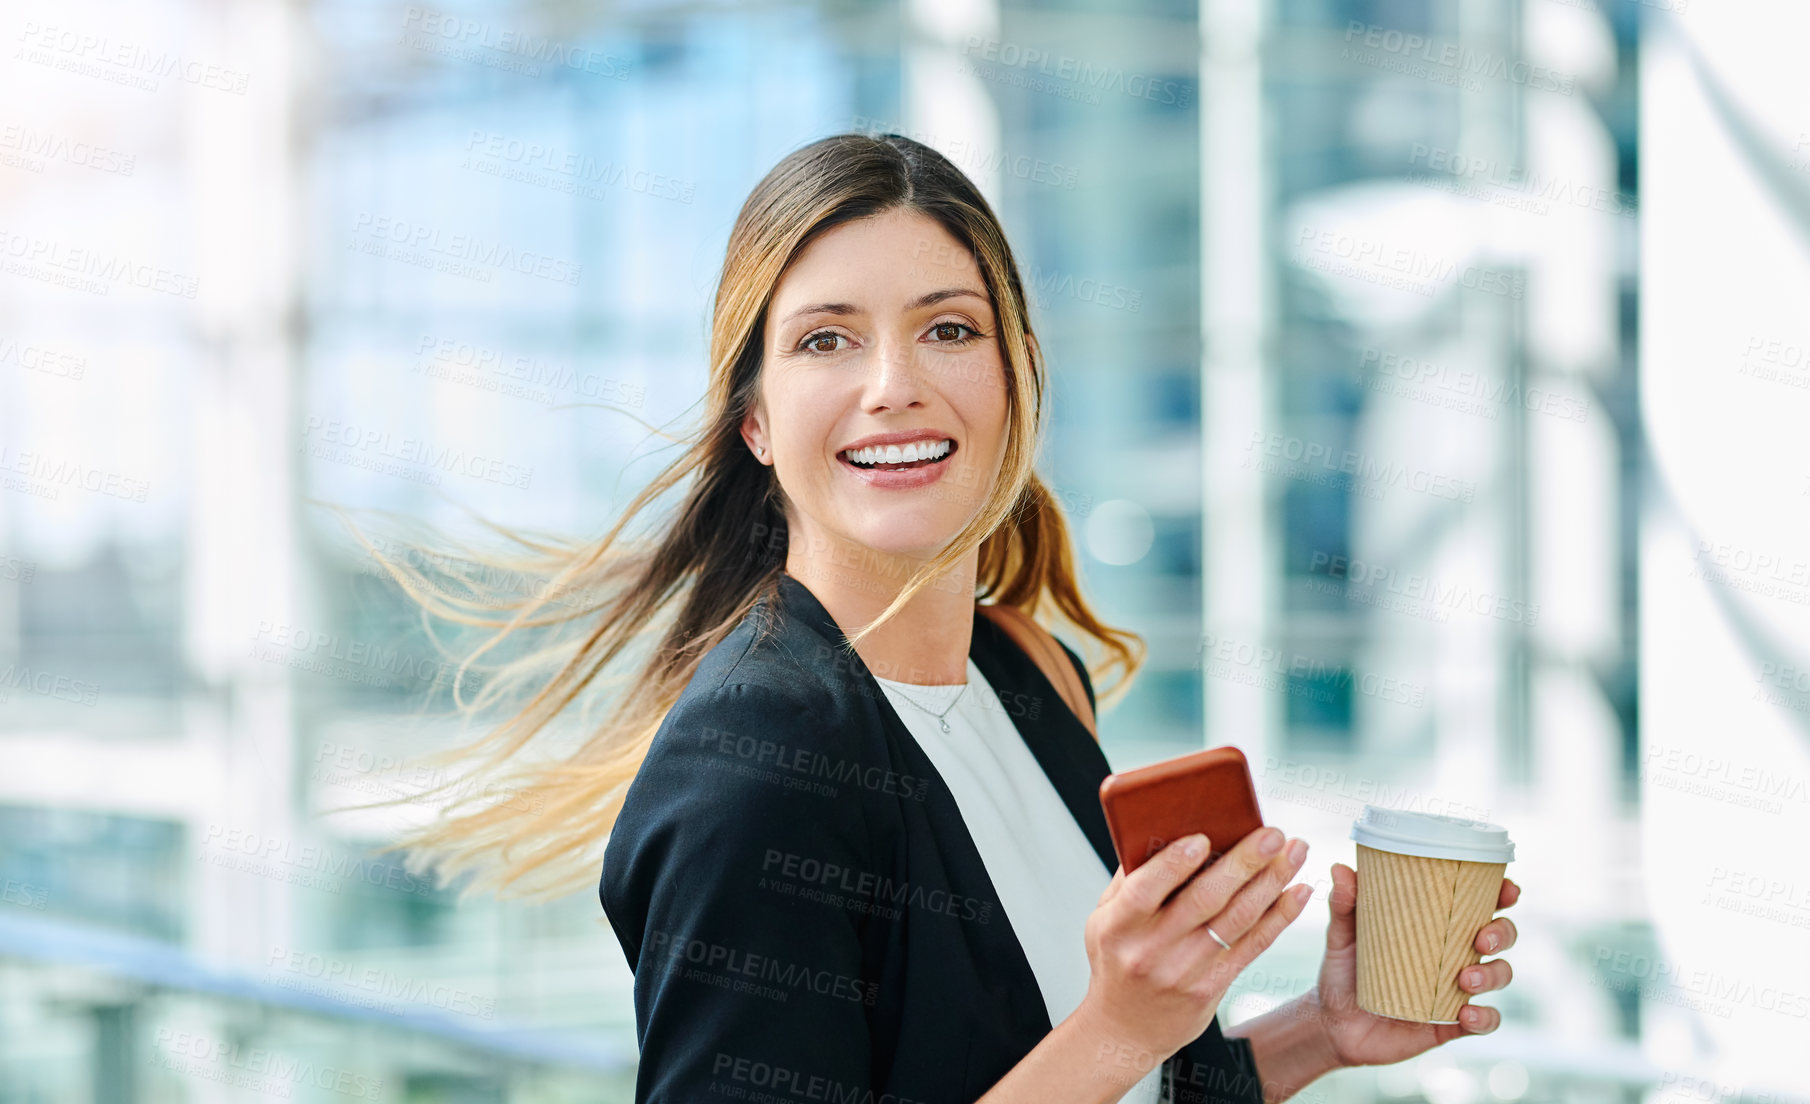 Buy stock photo Cropped portrait of an attractive young businesswoman smiling while walking through a modern office